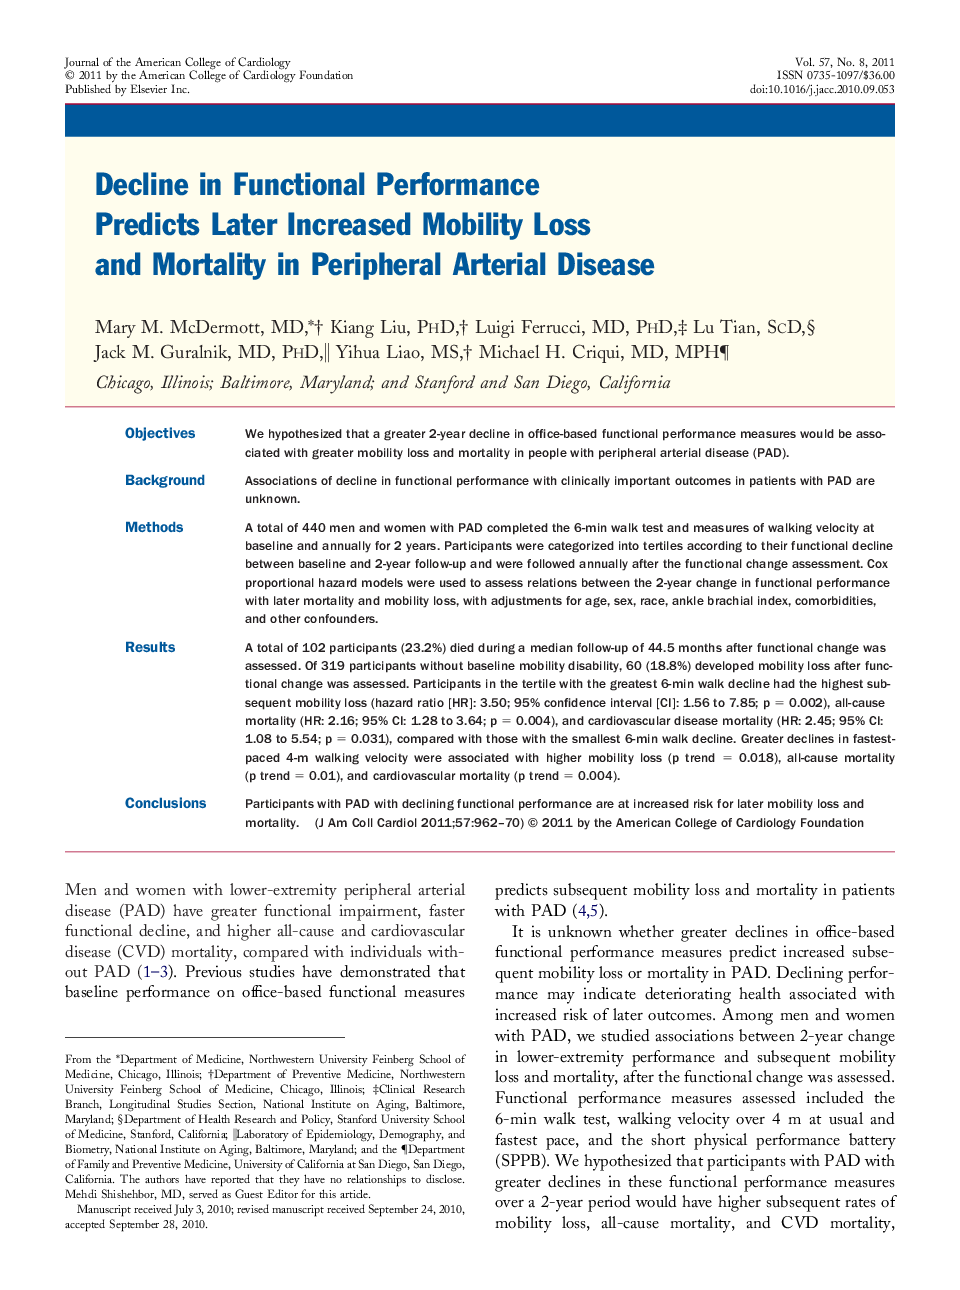 Decline in Functional Performance Predicts Later Increased Mobility Loss and Mortality in Peripheral Arterial Disease 